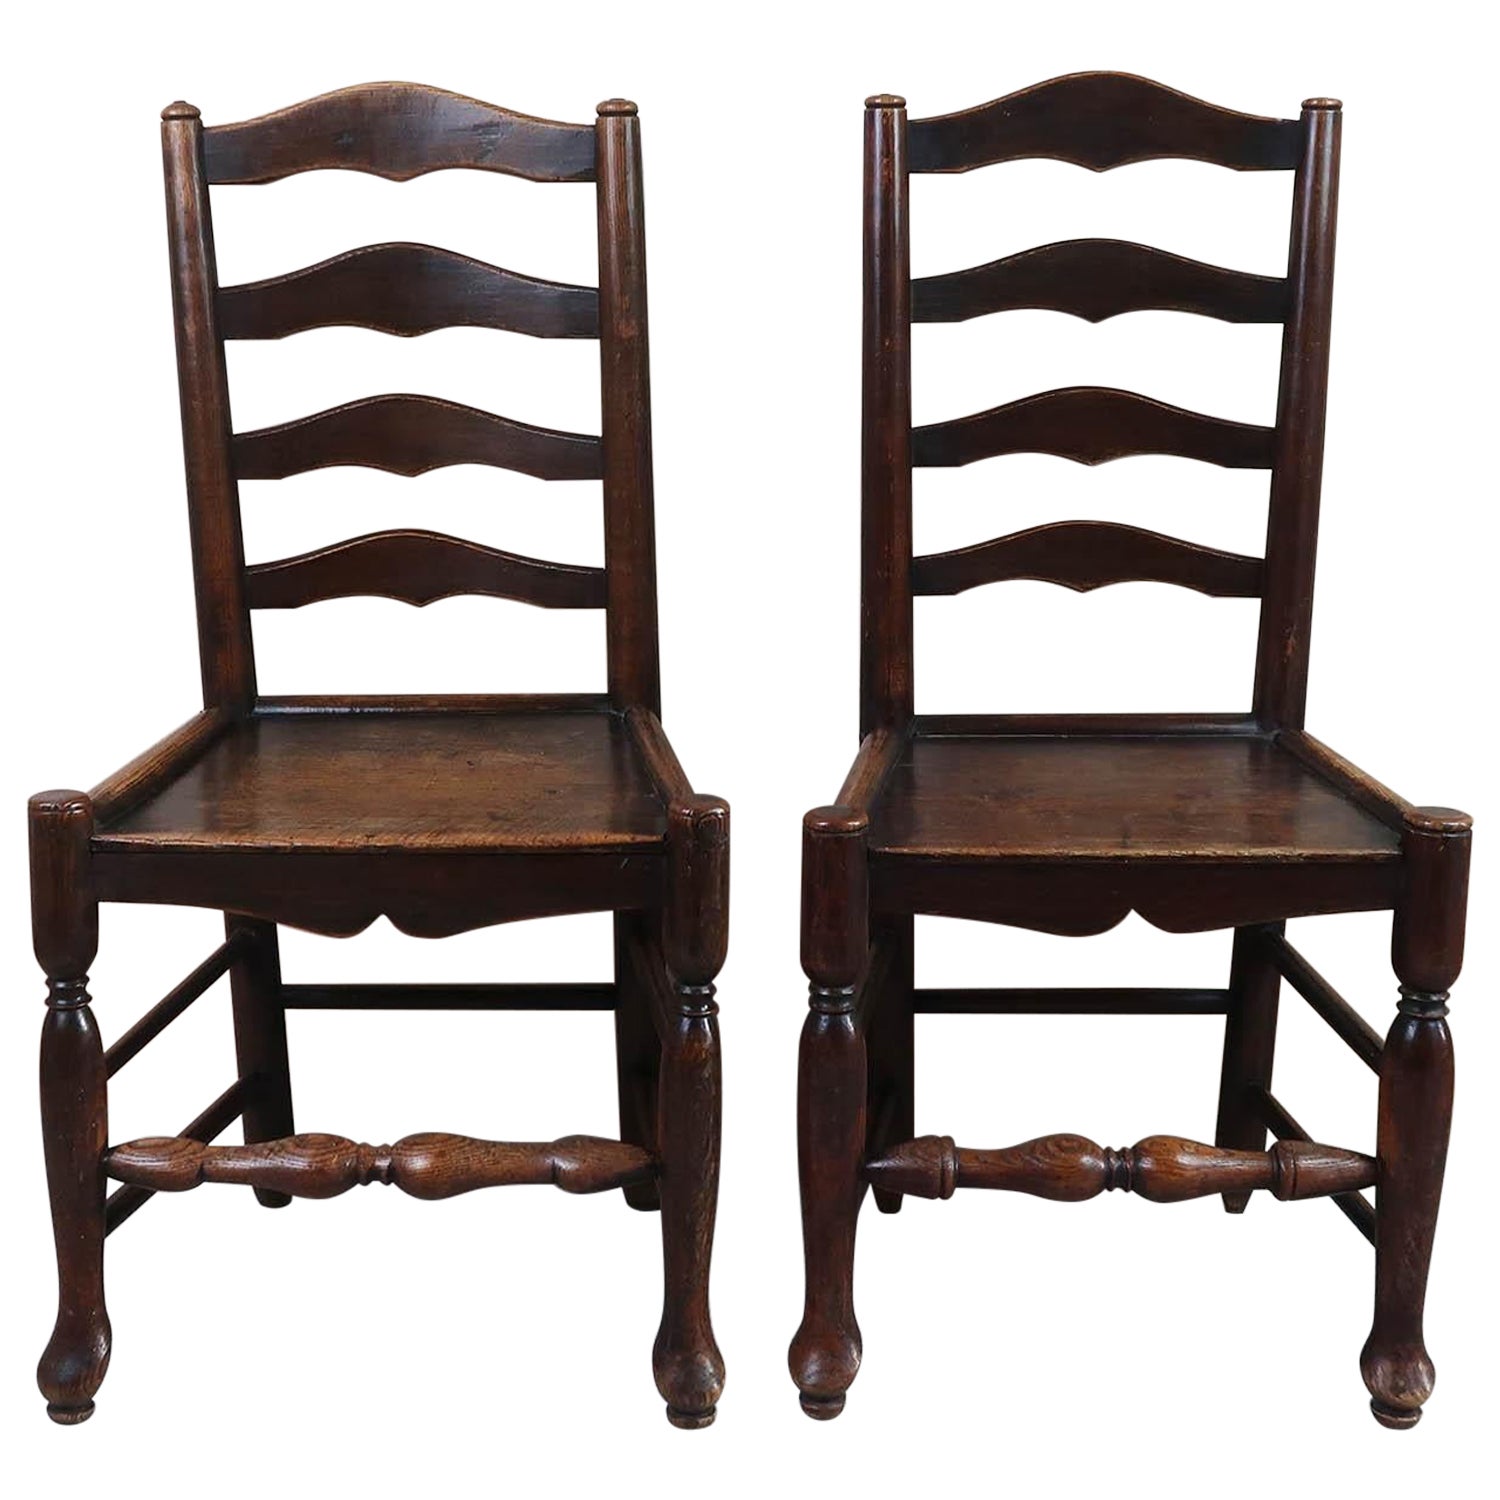 Near Pair of Antique Welsh Country Ladder back Chairs. C.1800 im Angebot